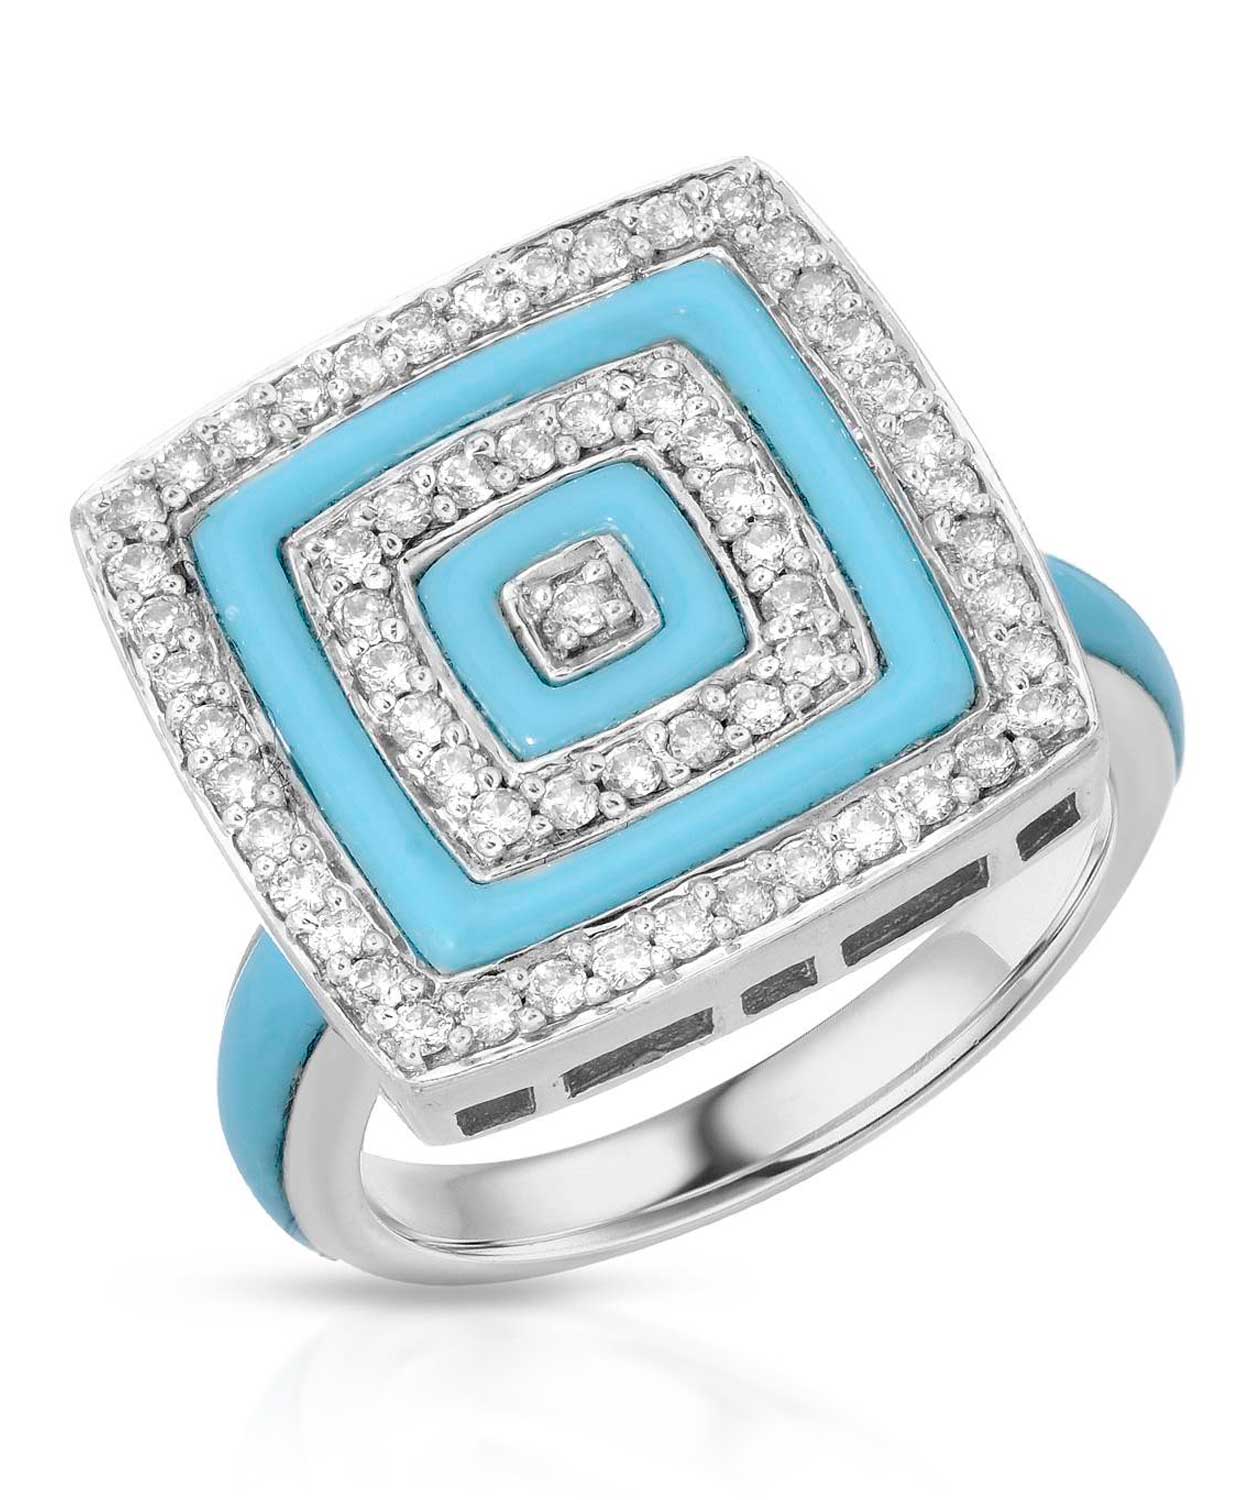 Allure Collection 2.48 ctw Created Turquoise and Diamond 14k White Gold Elegant Right Hand Ring View 1